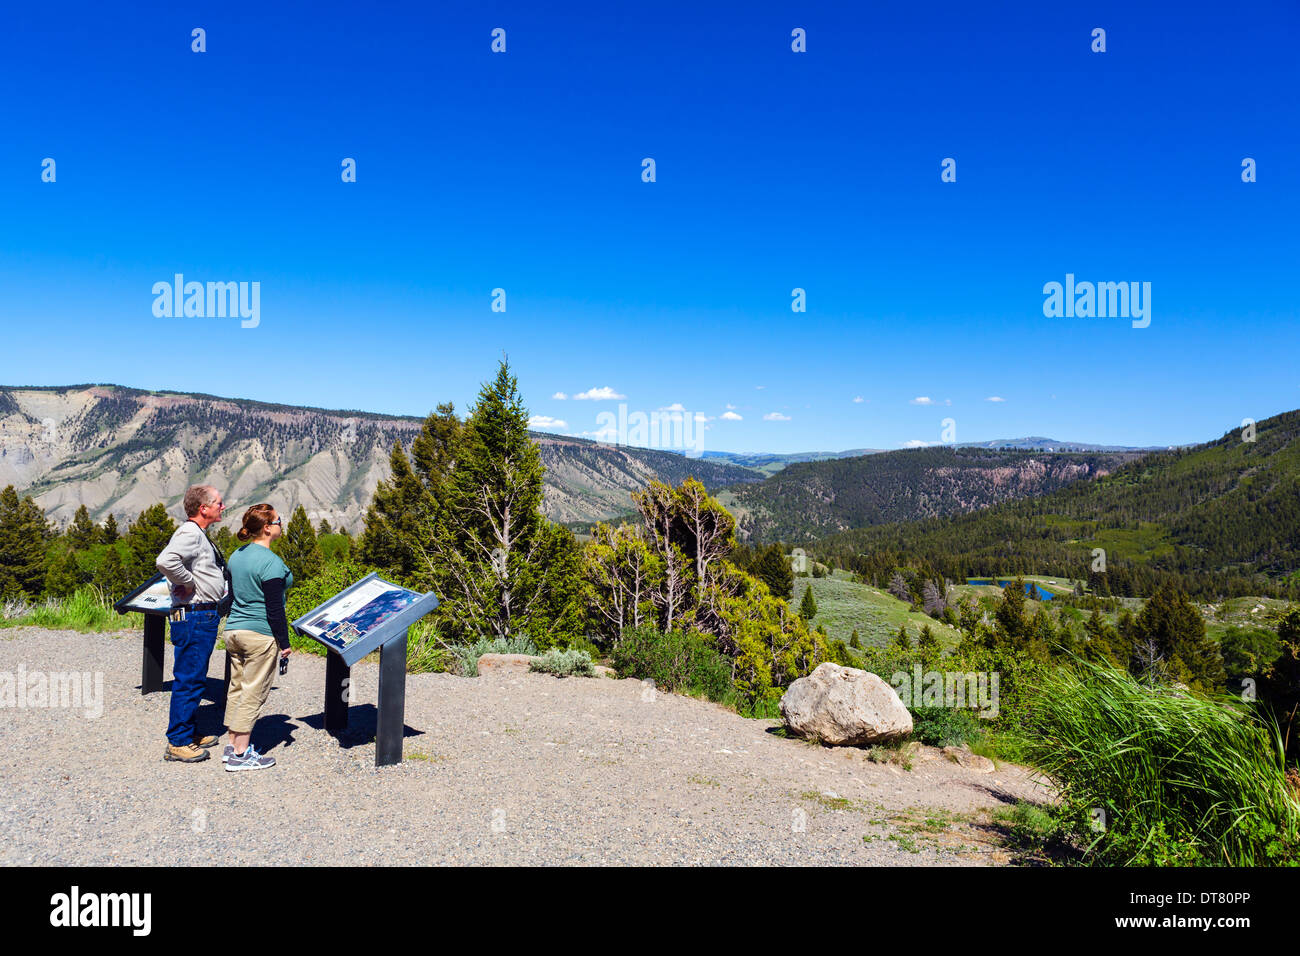 Tourists at the Bunsen Peak overlook on the Grand Loop Road, Yellowstone National Park, Wyoming, USA Stock Photo